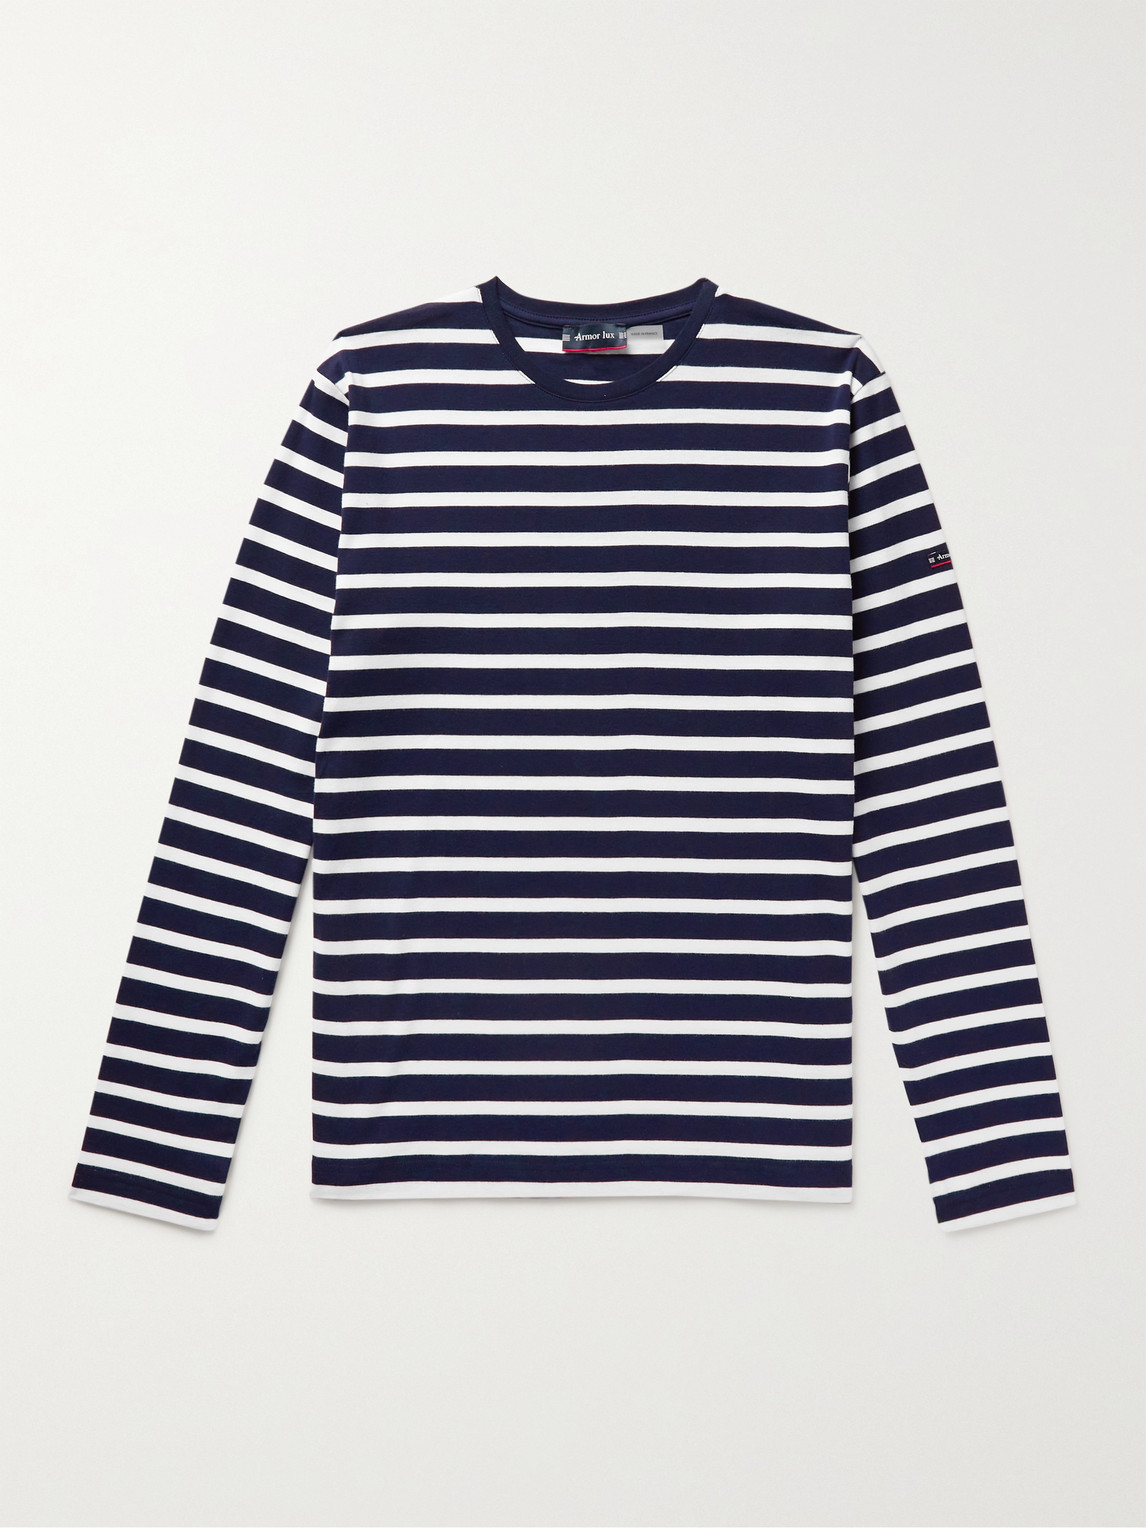 Armor-lux Slim-fit Striped Cotton-jersey T-shirt In Blue